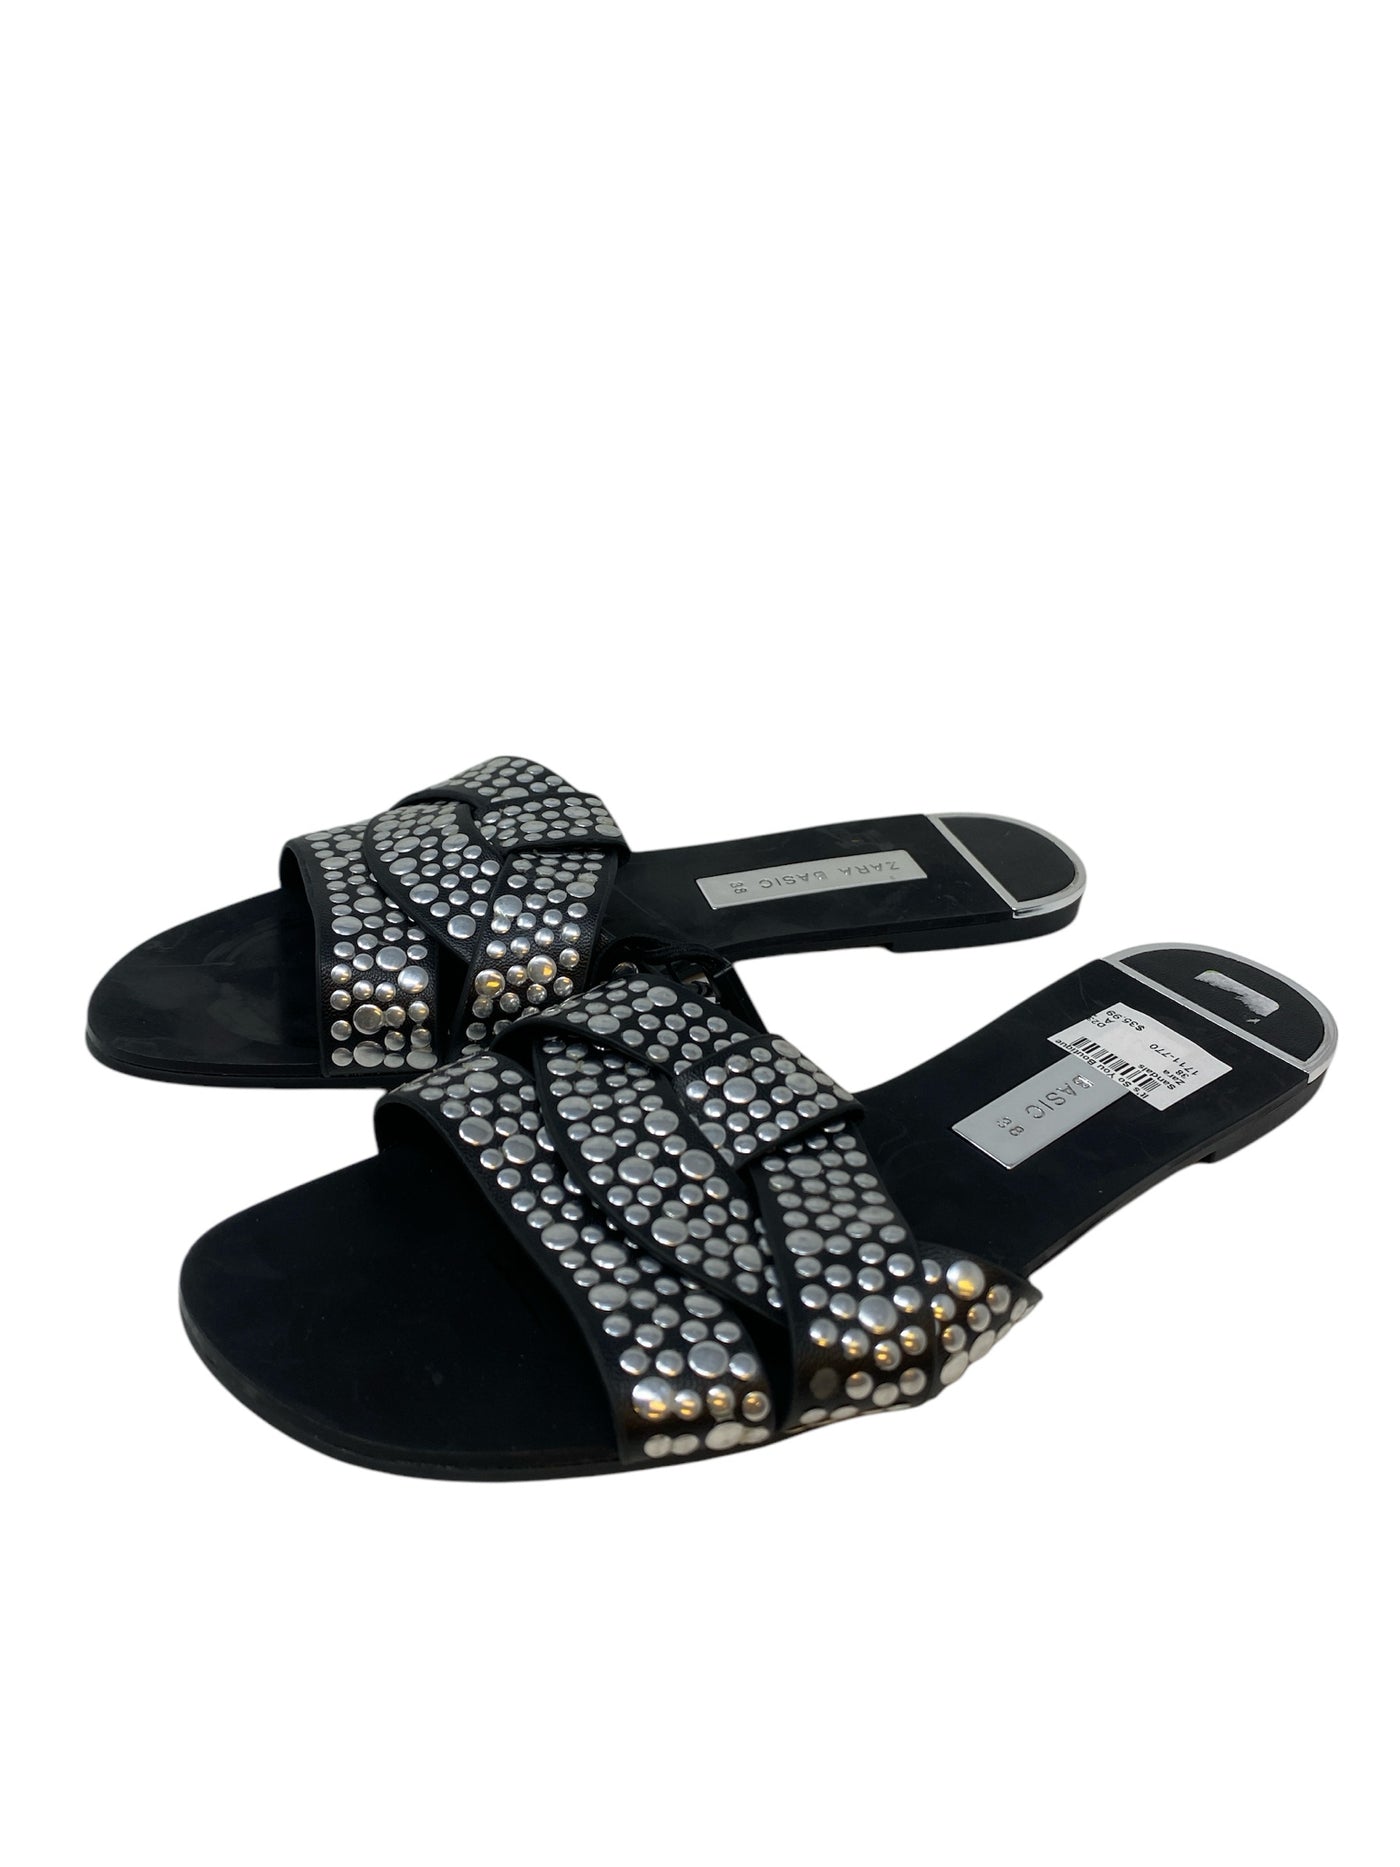 Zara Women Size 38 Black Print New With Tags Sandals